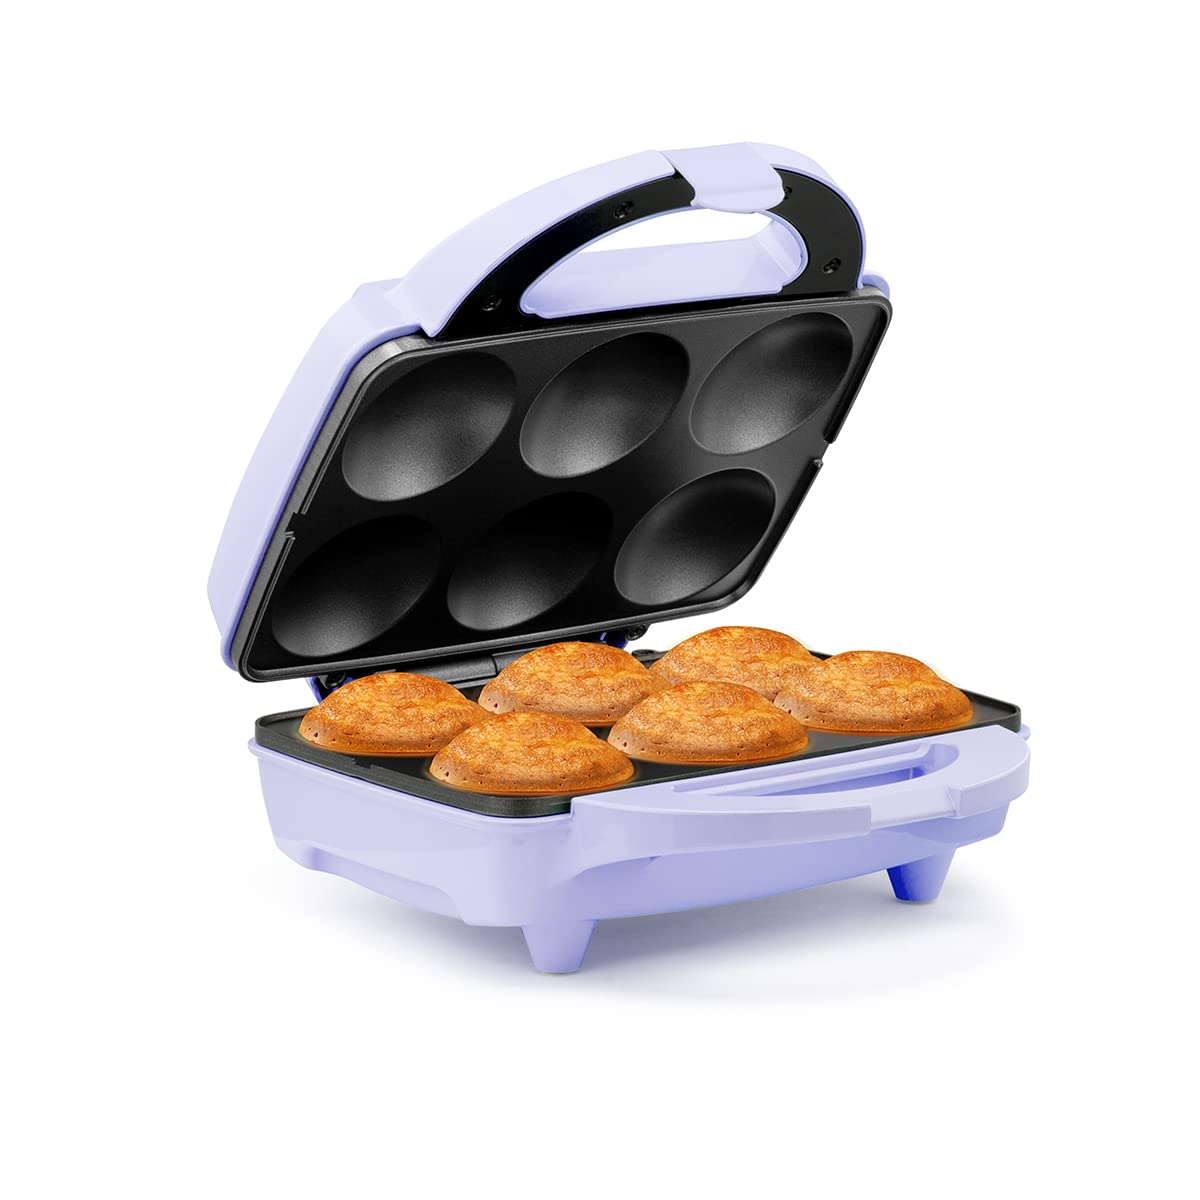 Holstein Housewares Non-Stick Cupcake Maker, Lavender/Stainless Steel - Makes 6 Cupcakes, Muffins, Cinnamon Buns, and more for Birthdays, Holidays, Bake Sales or Special Occasions